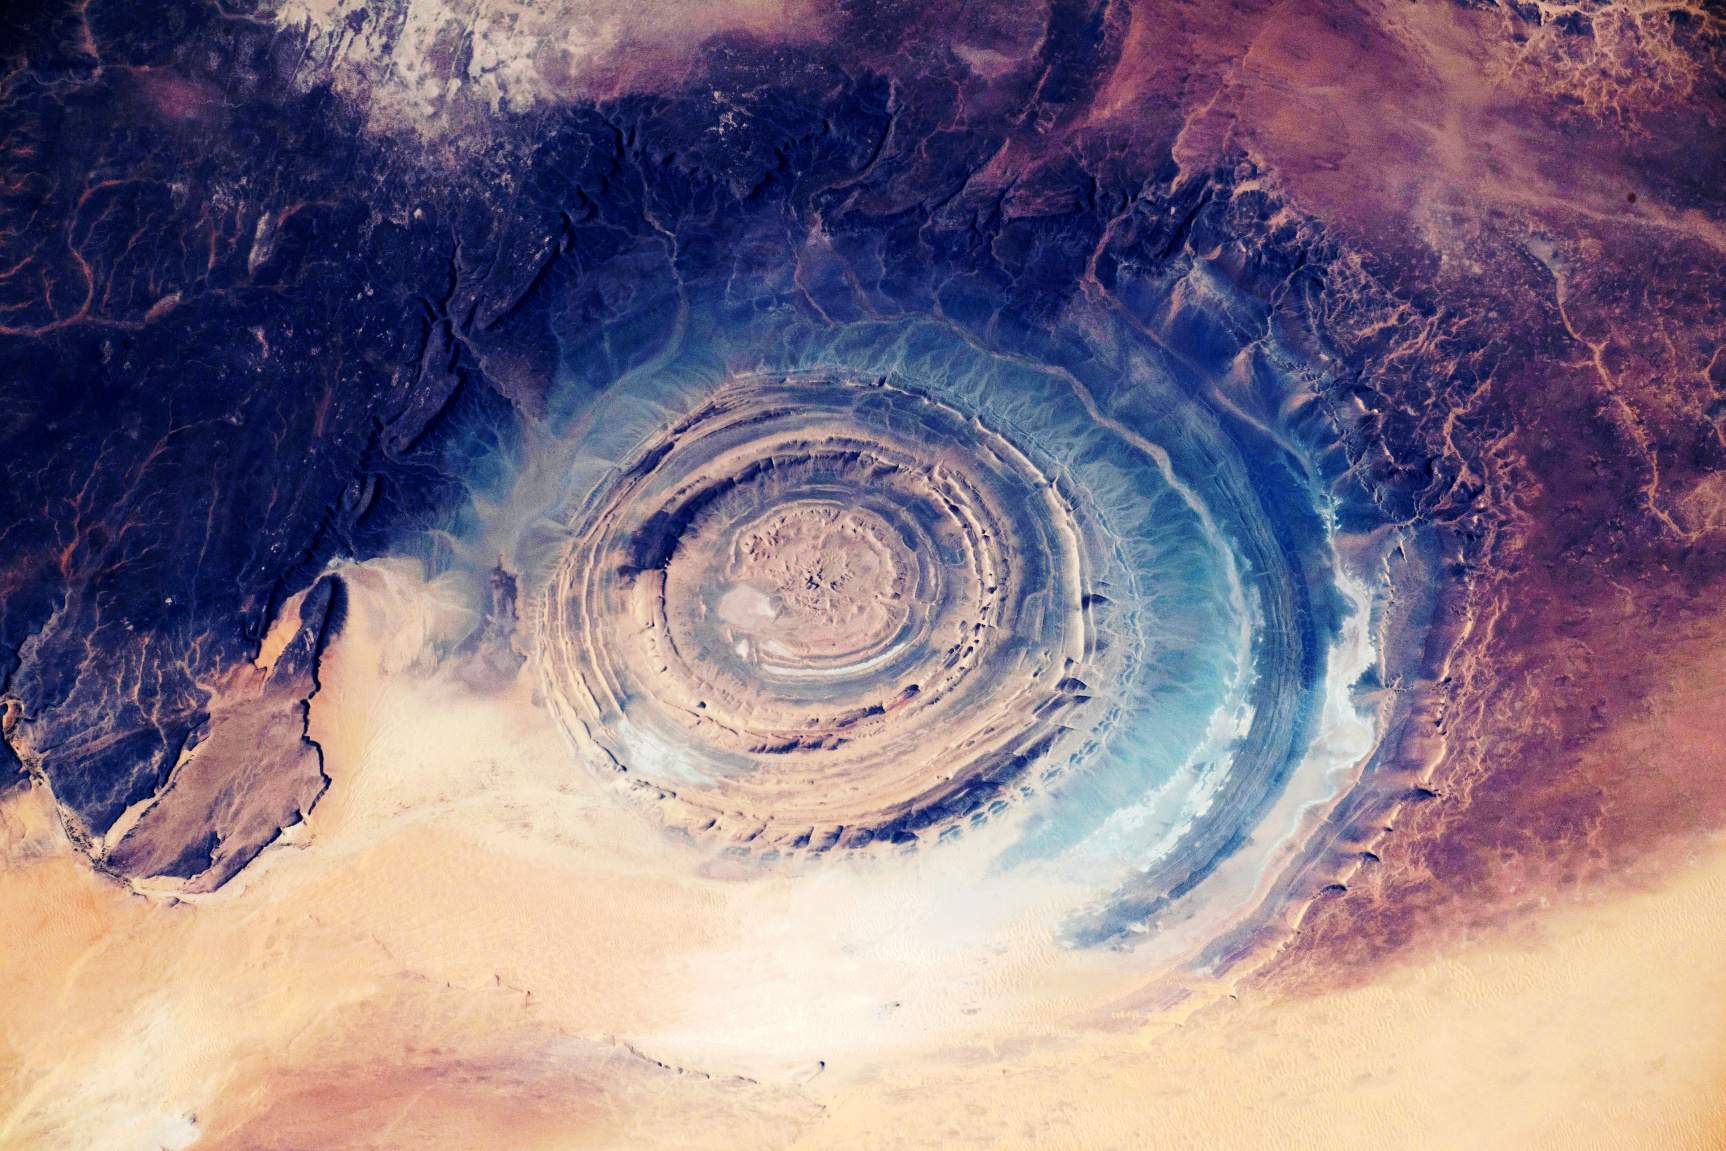 Richat structure: Is this Atlantis, hiding in plain sight in the Sahara? 3